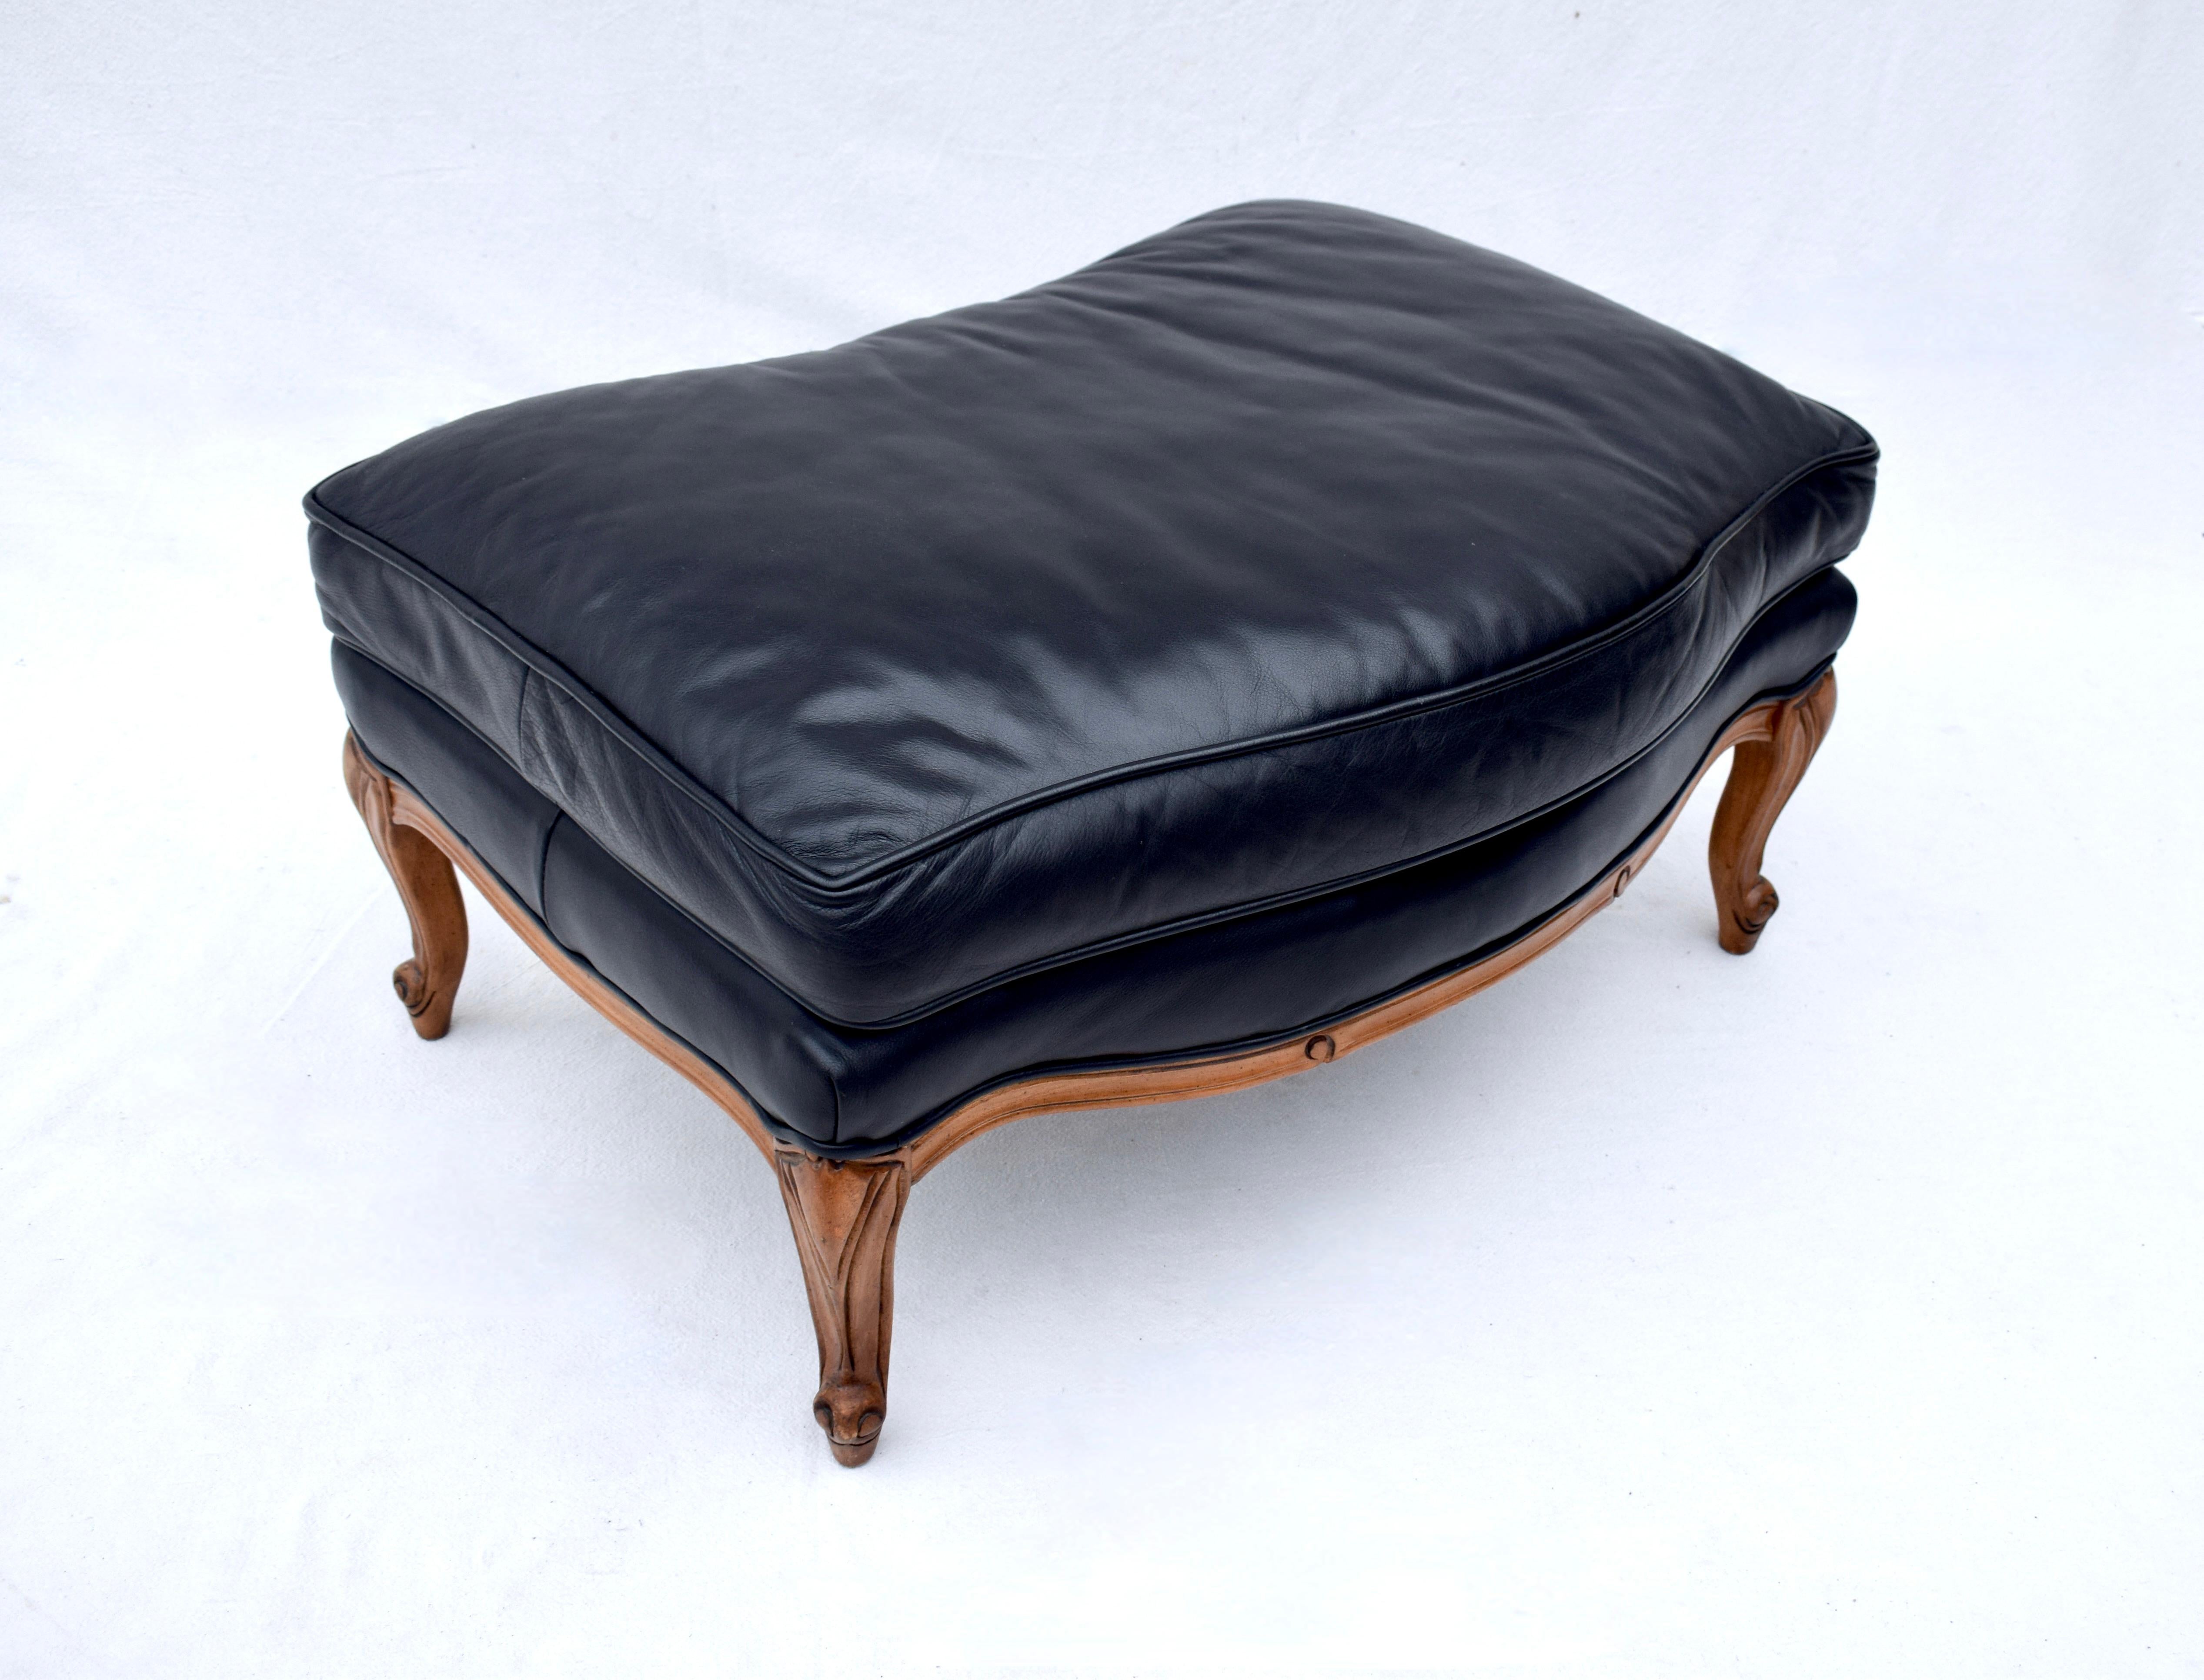 Woodward & Lothrop Top of the Line Black Leather and Walnut Club Chair & Ottoman 4